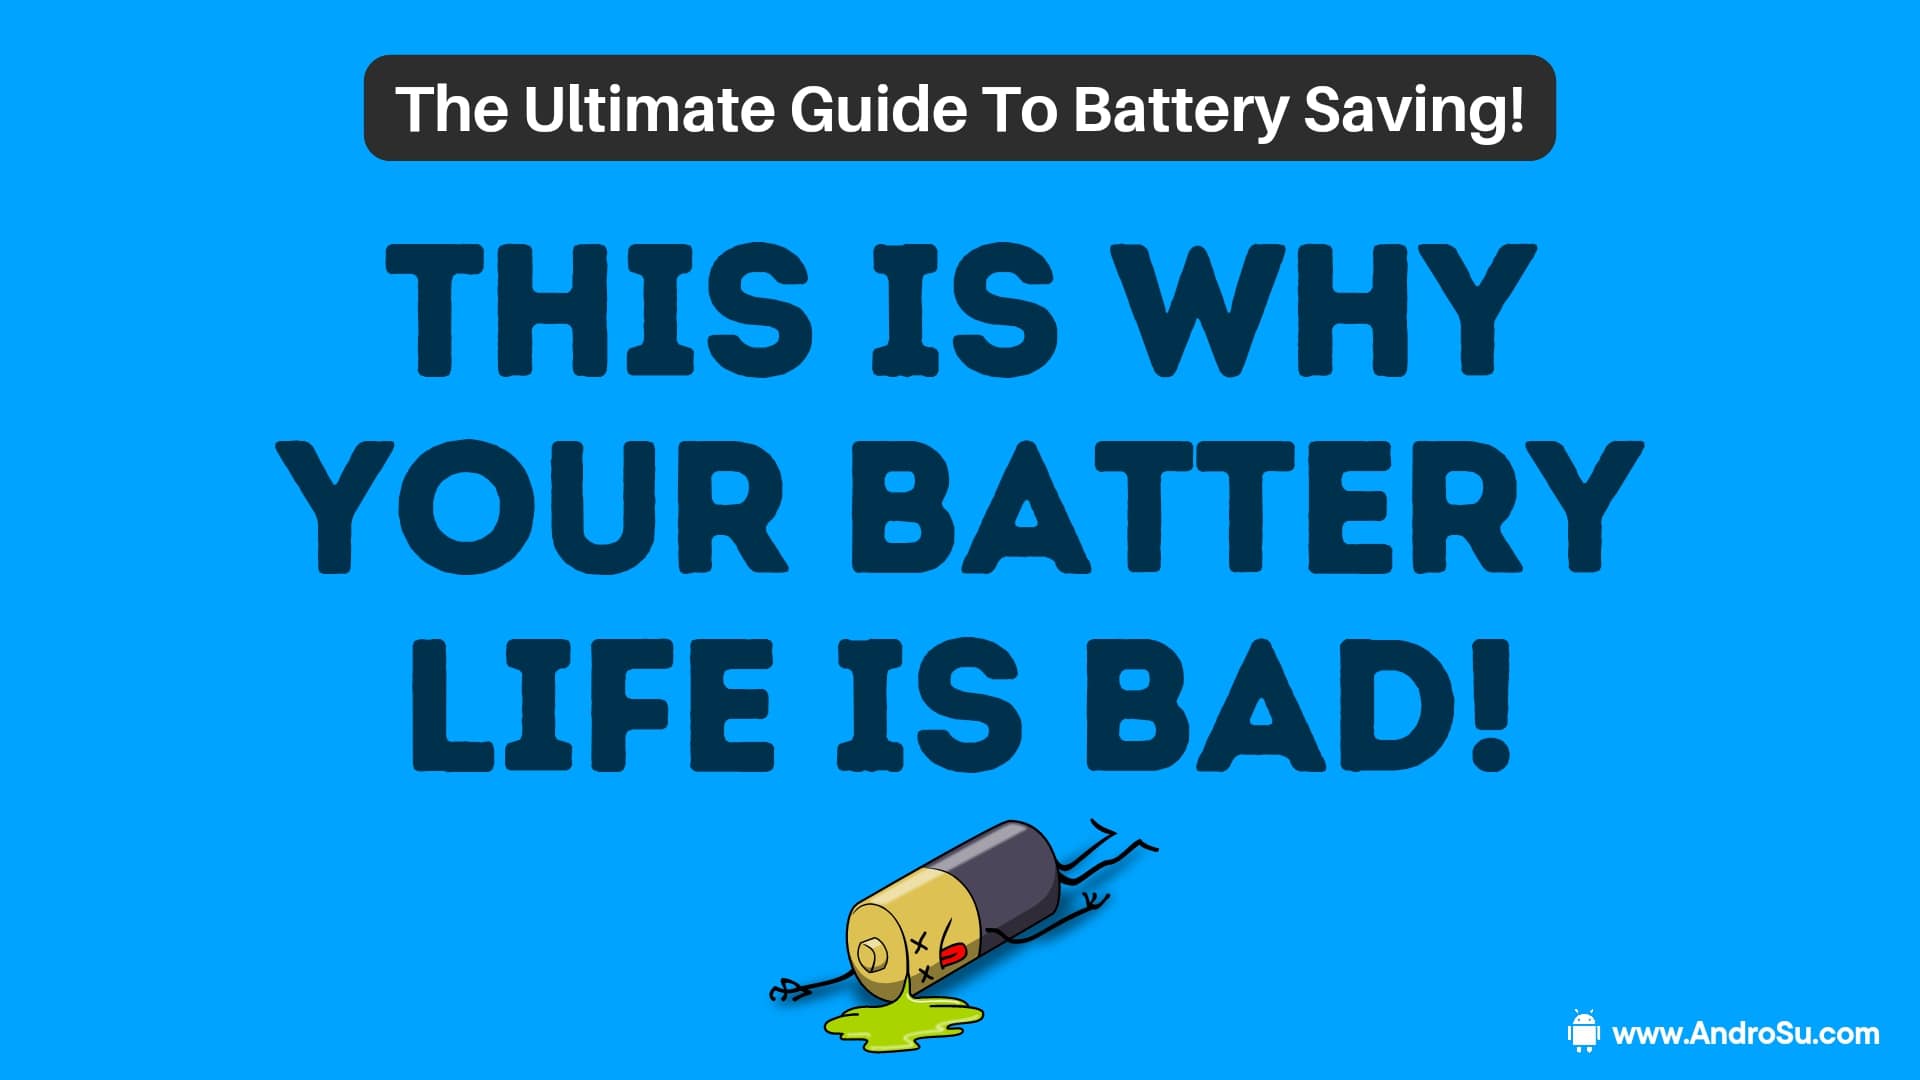 Why Your Phone Battery Life Doesn’t Last & How To Fix It